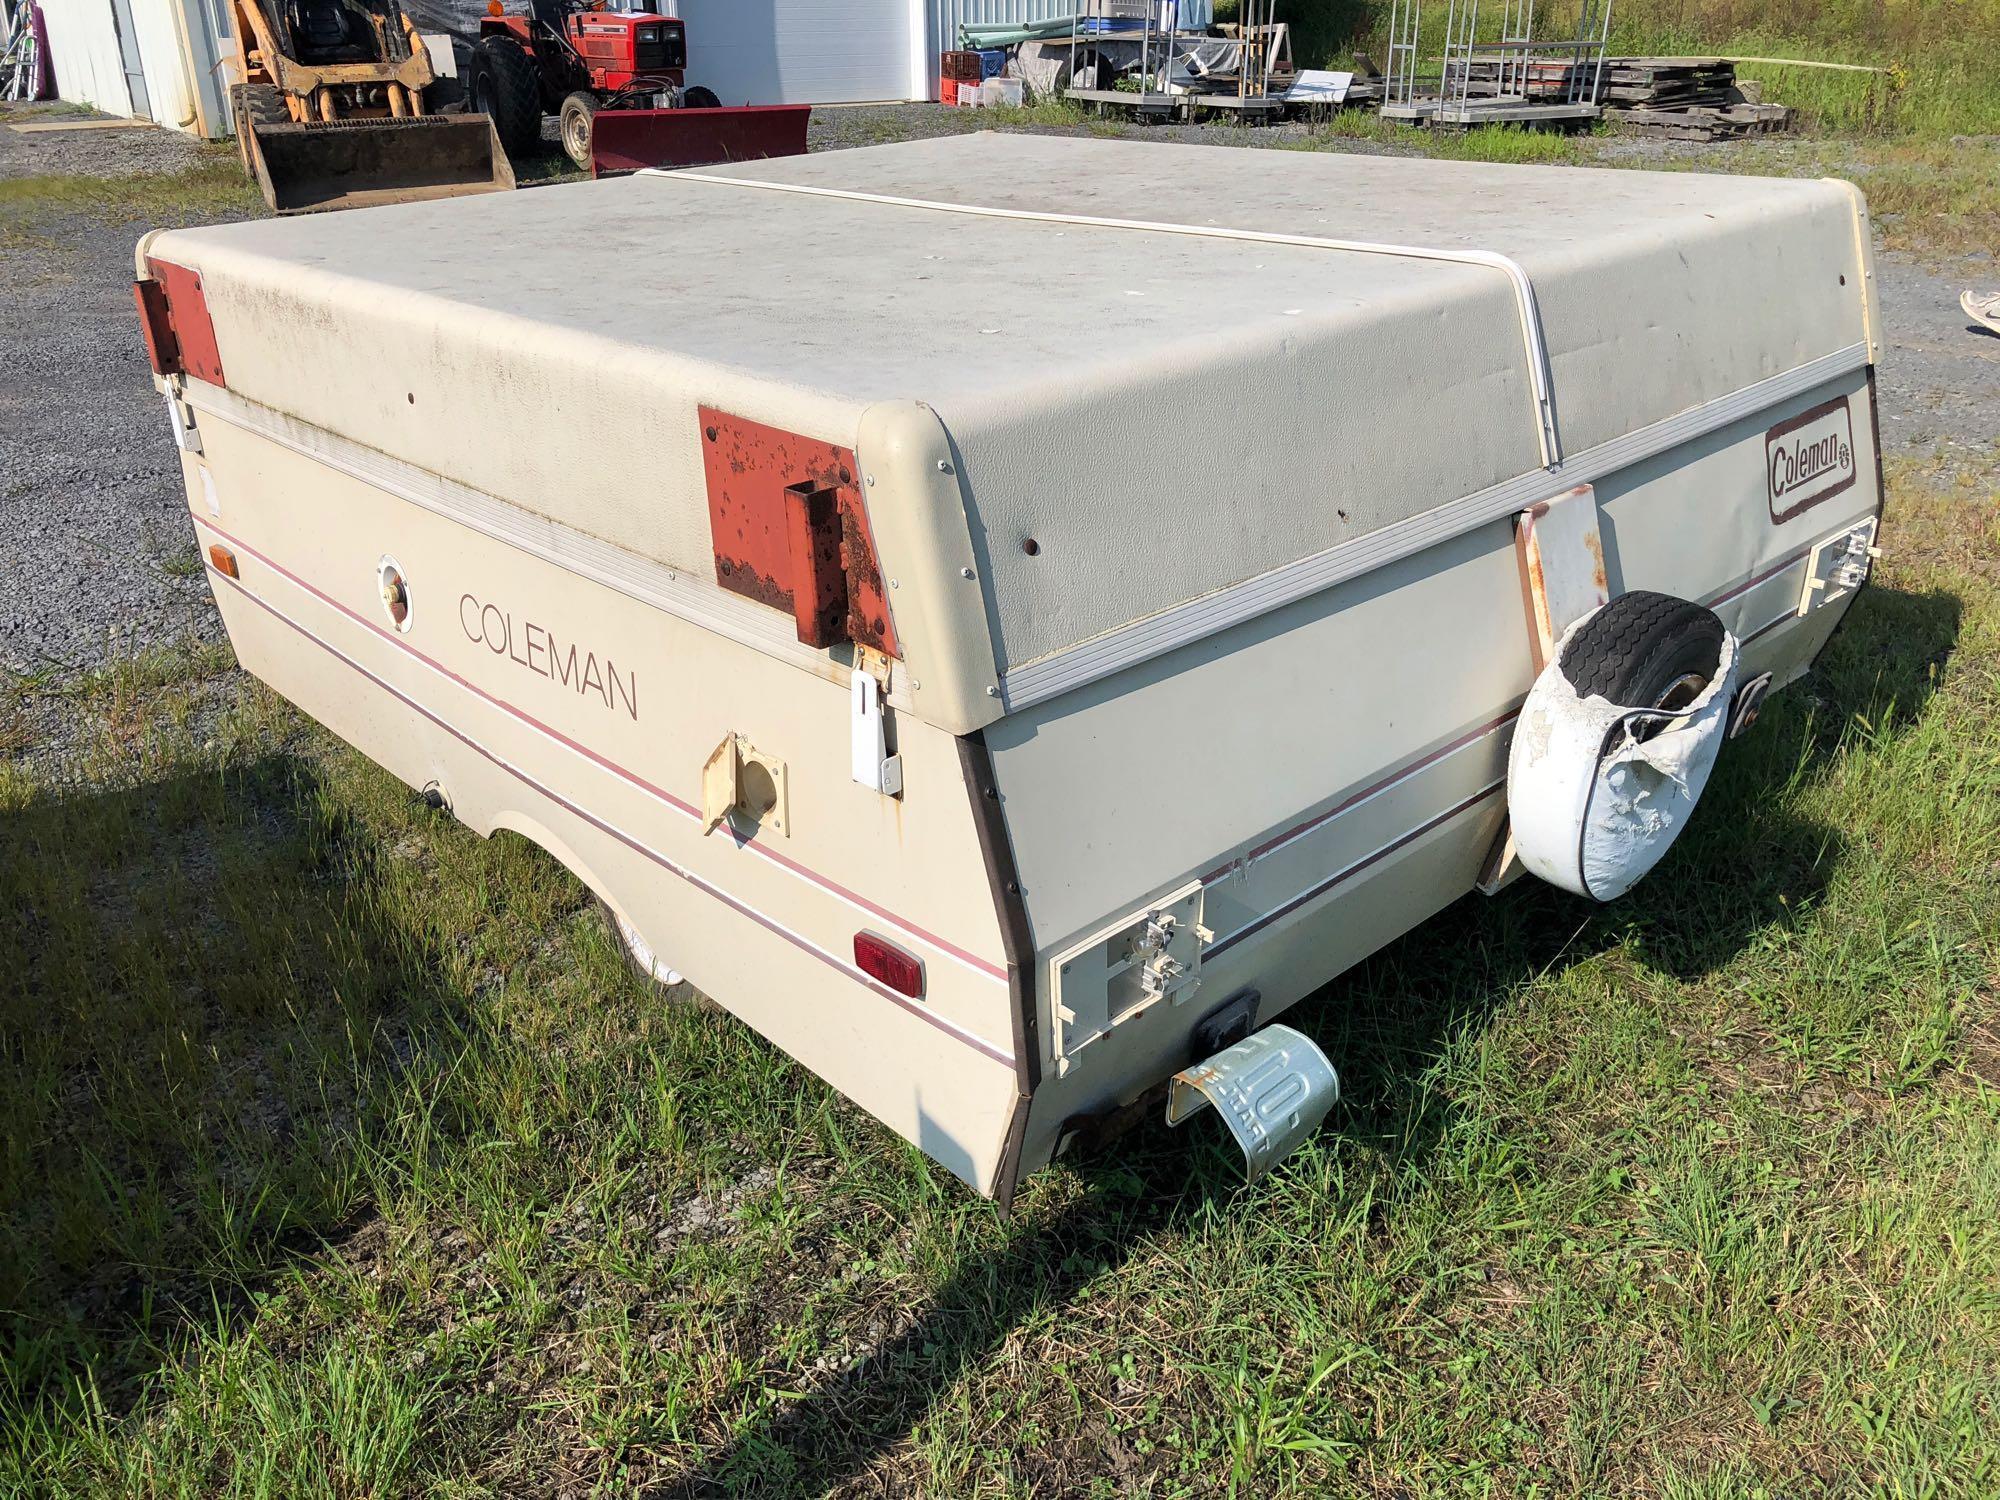 COLEMAN COLUMBIA camper trailer(just shell INSIDE GUTTED)